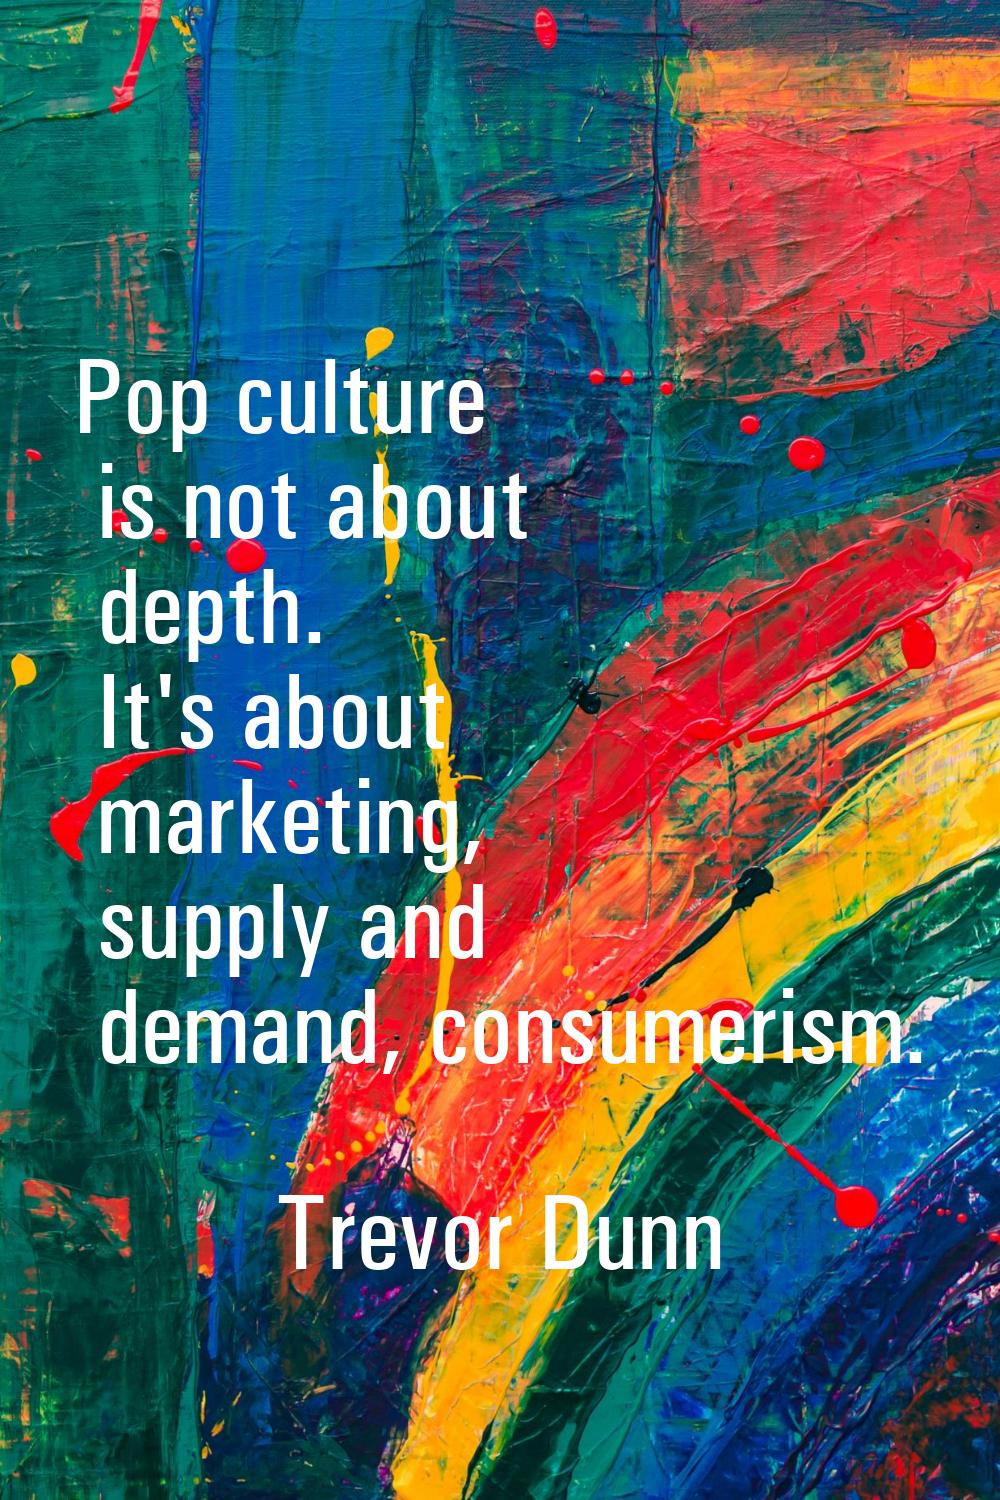 Pop culture is not about depth. It's about marketing, supply and demand, consumerism.